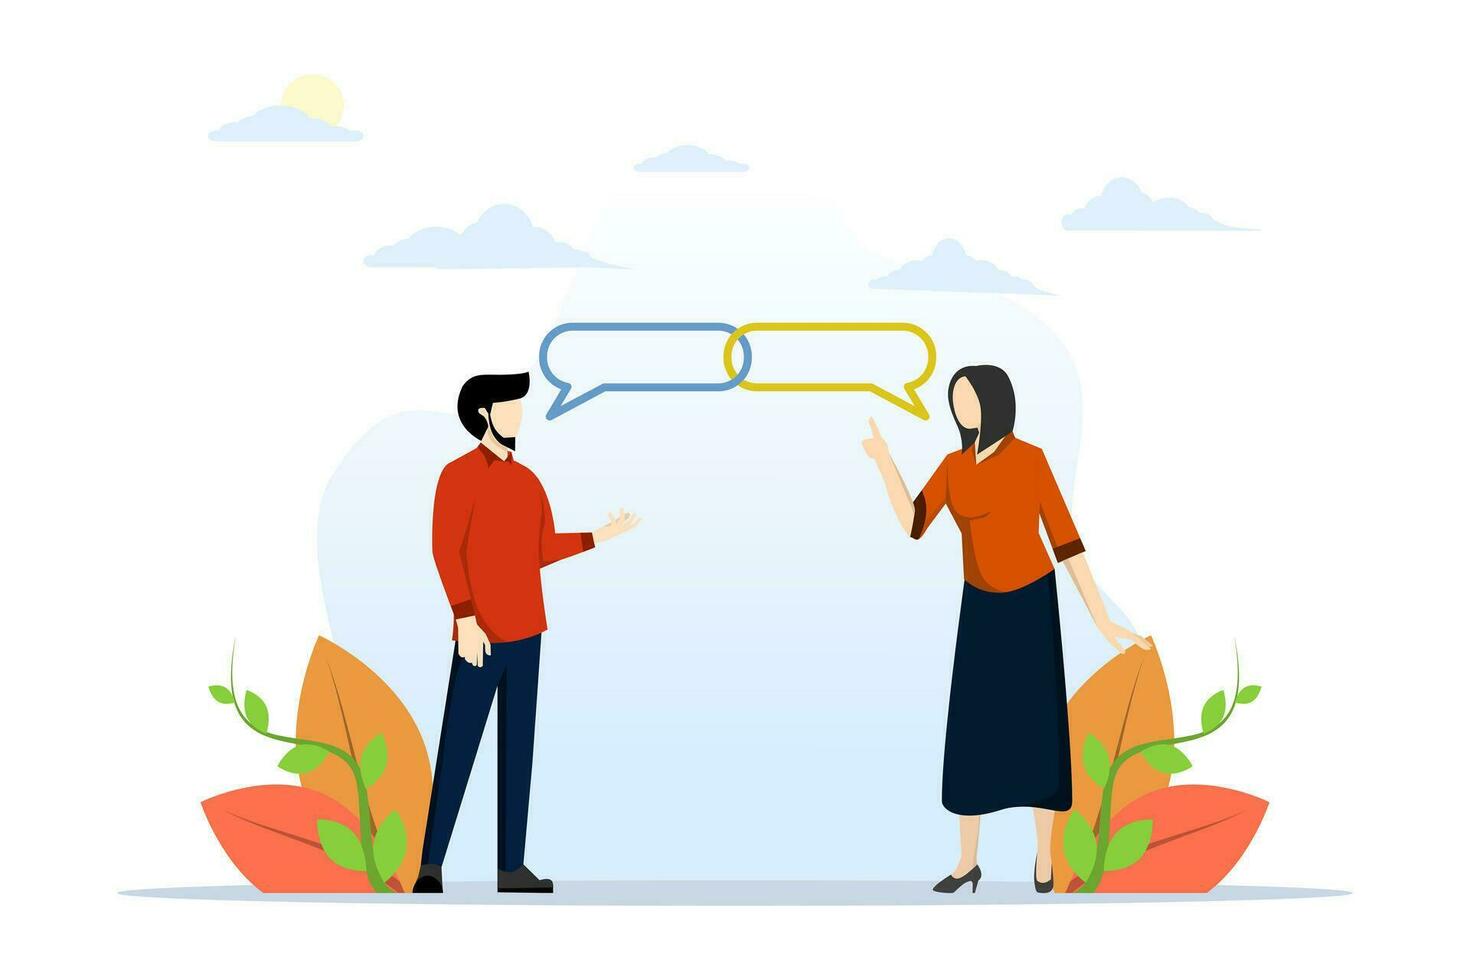 concept of customer engagement, emotional connection between customer and brand, loyalty, consumer trust or deep connection, businessman represents brand talk with customer as related speech bubble. vector